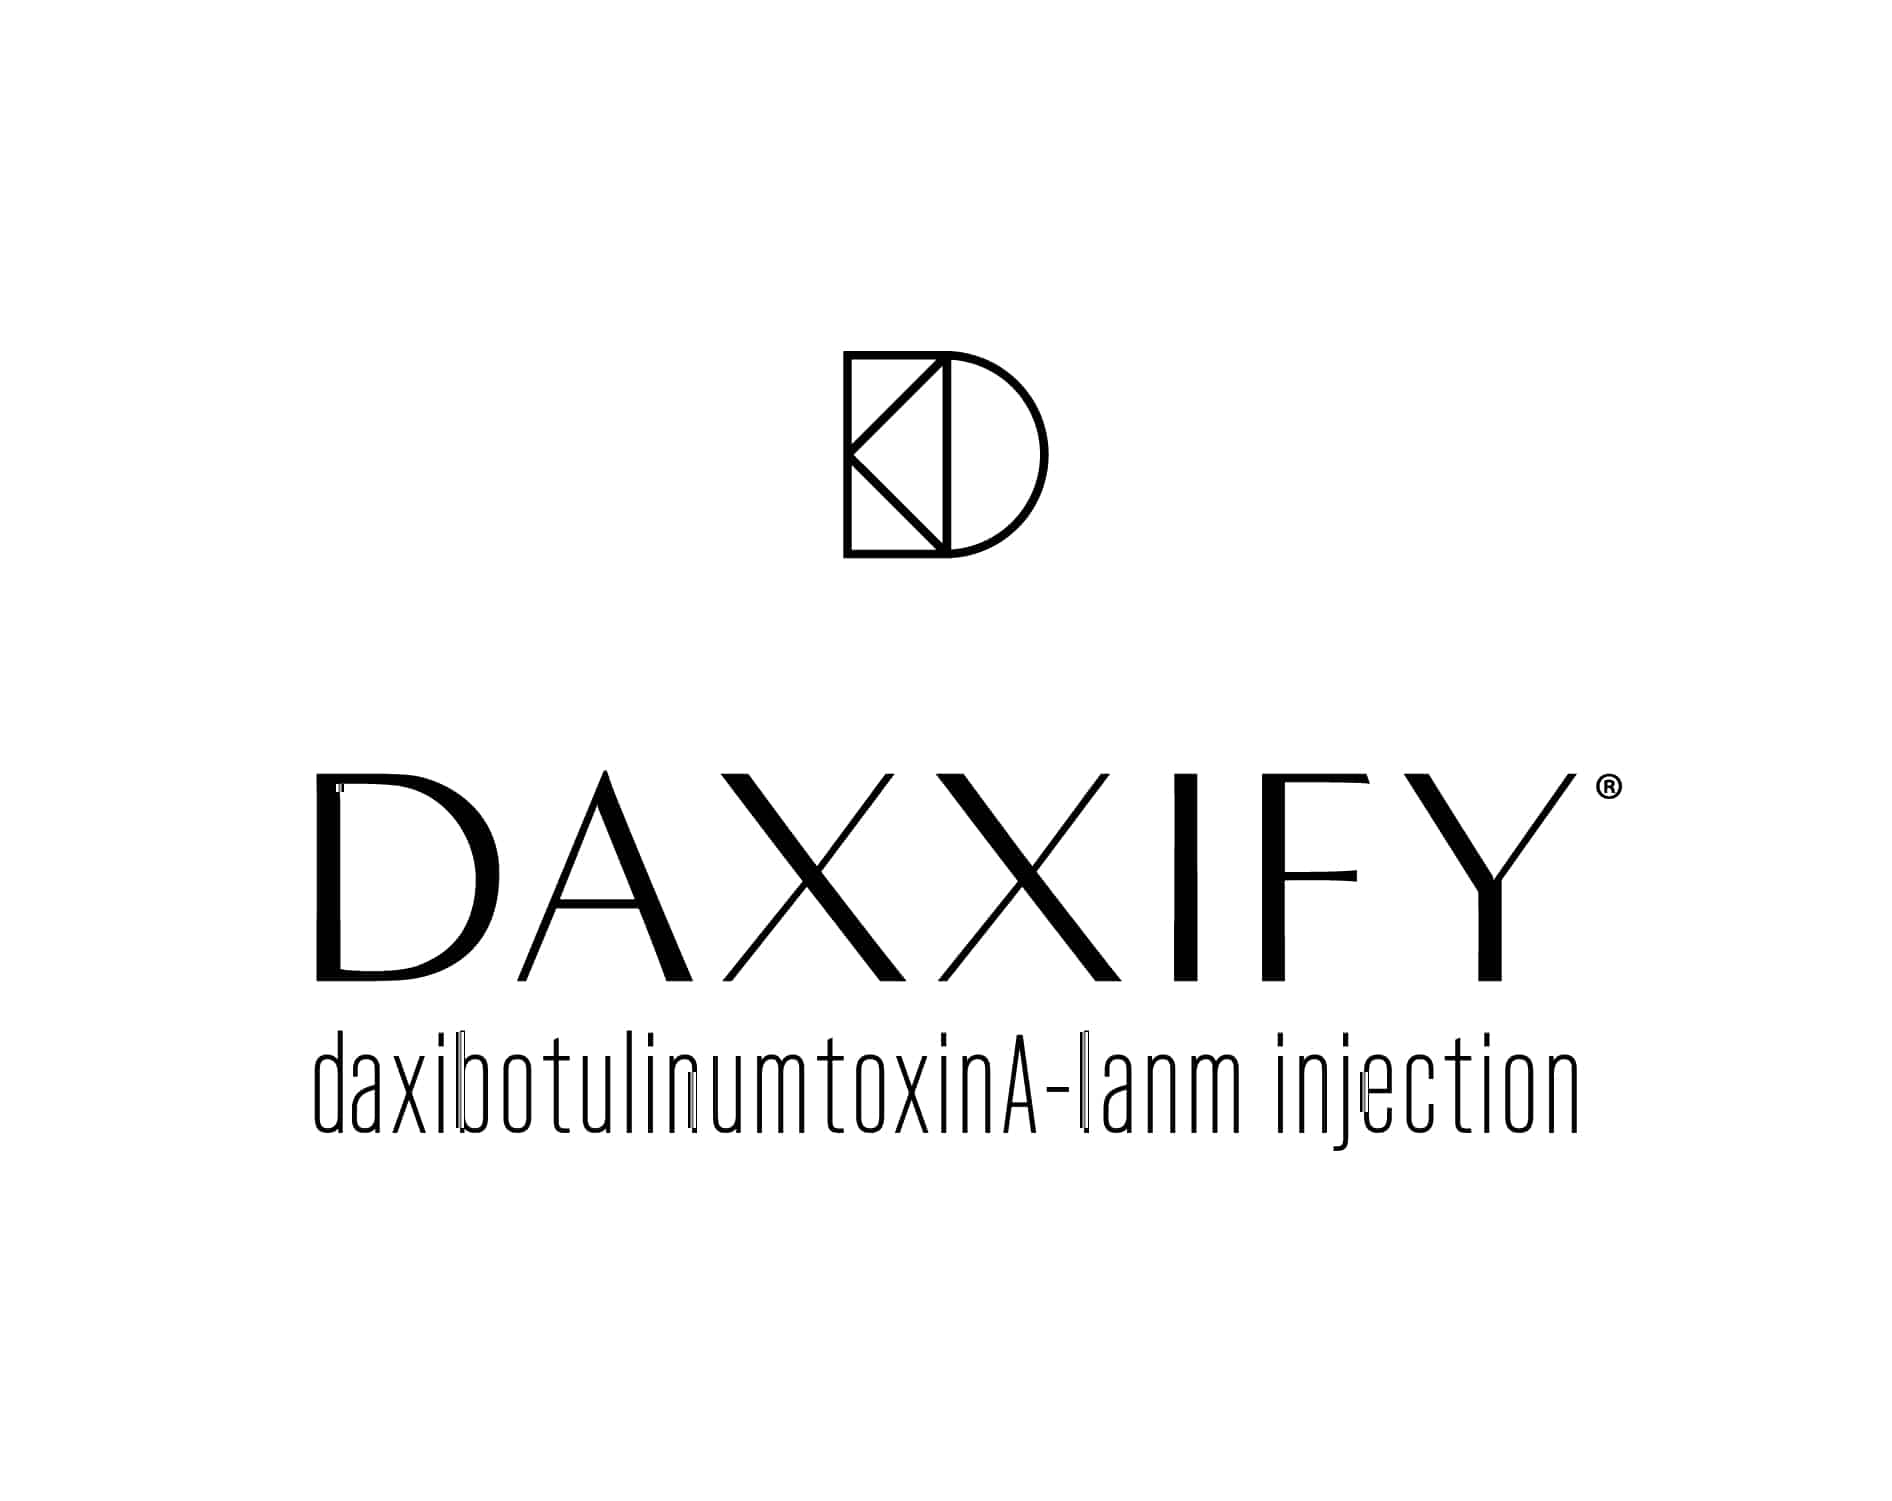 DAXXIFY (BETTER BOTOX ) LESS EXPENSIVE - LASTS LONGER (Up to 6mts) Buy 20 units, Receive 5 Free - Buy 40 Units , Receive 10 Free. $8 a unit!